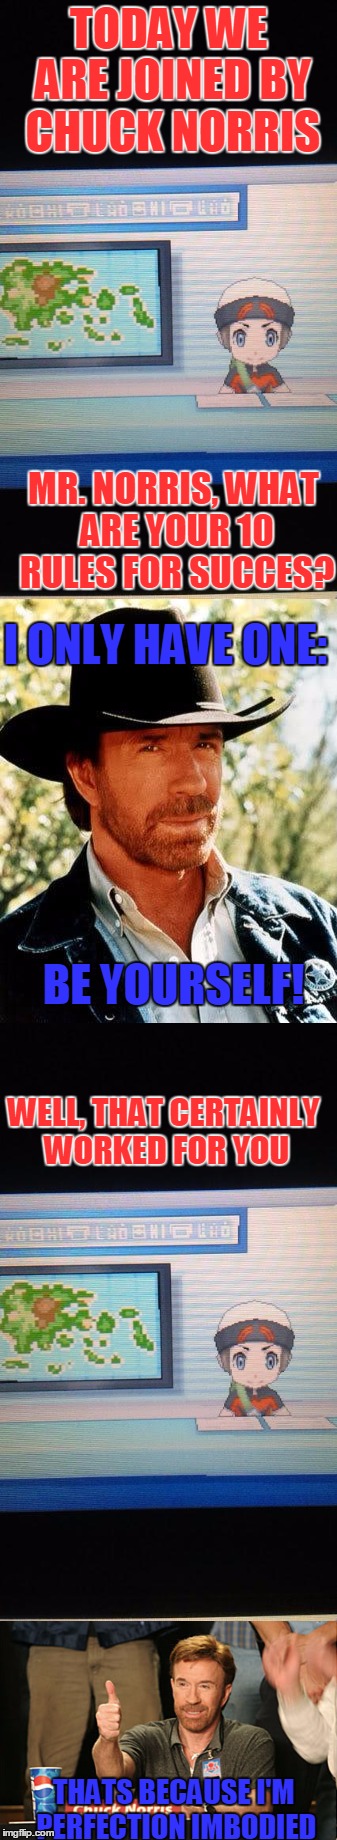 By The Way: I'm Only Half Joking Here | TODAY WE ARE JOINED BY CHUCK NORRIS; MR. NORRIS, WHAT ARE YOUR 10 RULES FOR SUCCES? I ONLY HAVE ONE:; BE YOURSELF! WELL, THAT CERTAINLY WORKED FOR YOU; THATS BECAUSE I'M PERFECTION IMBODIED | image tagged in memes,motivational,chuck norris,pokemon,breaking news,so true memes | made w/ Imgflip meme maker